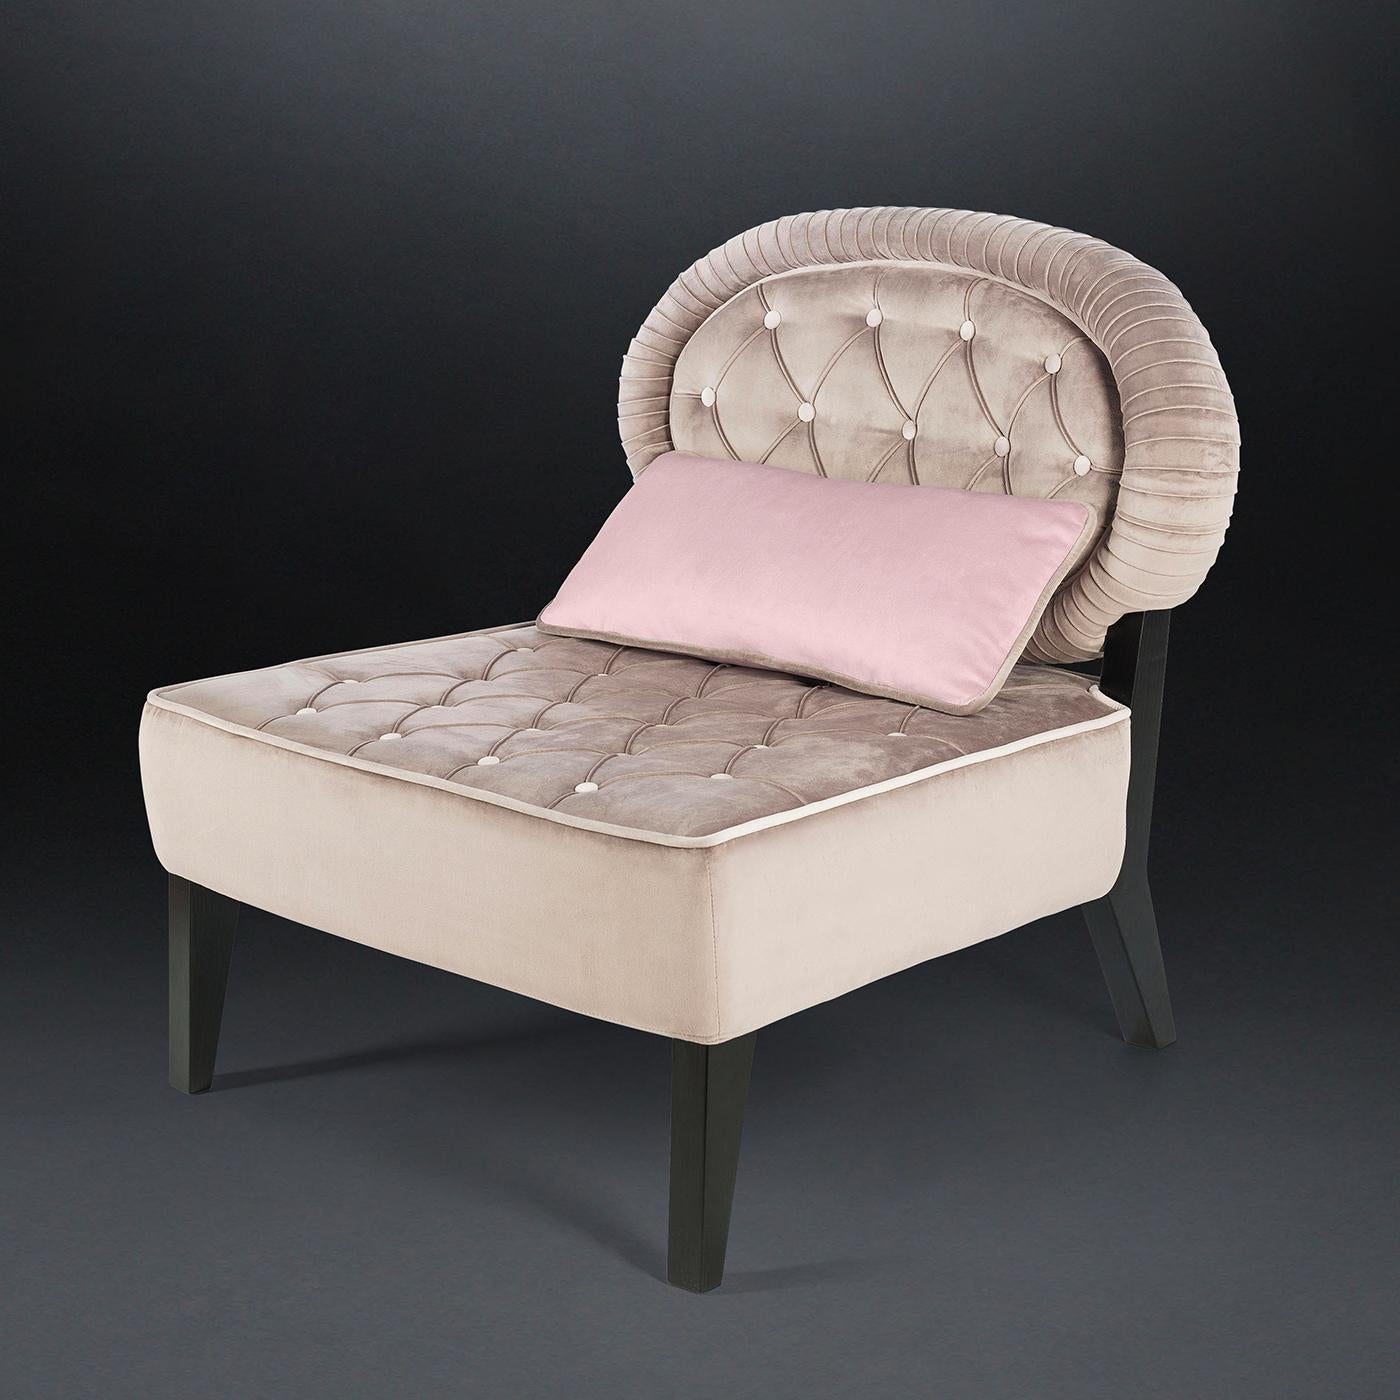 Traditional inspiration and a modern aesthetic create this unique design that will provide comfort and a delicate decorative accent in an entryway, living room, study, or bedroom. The deep seat and oval backrests are padded with a polyester lining